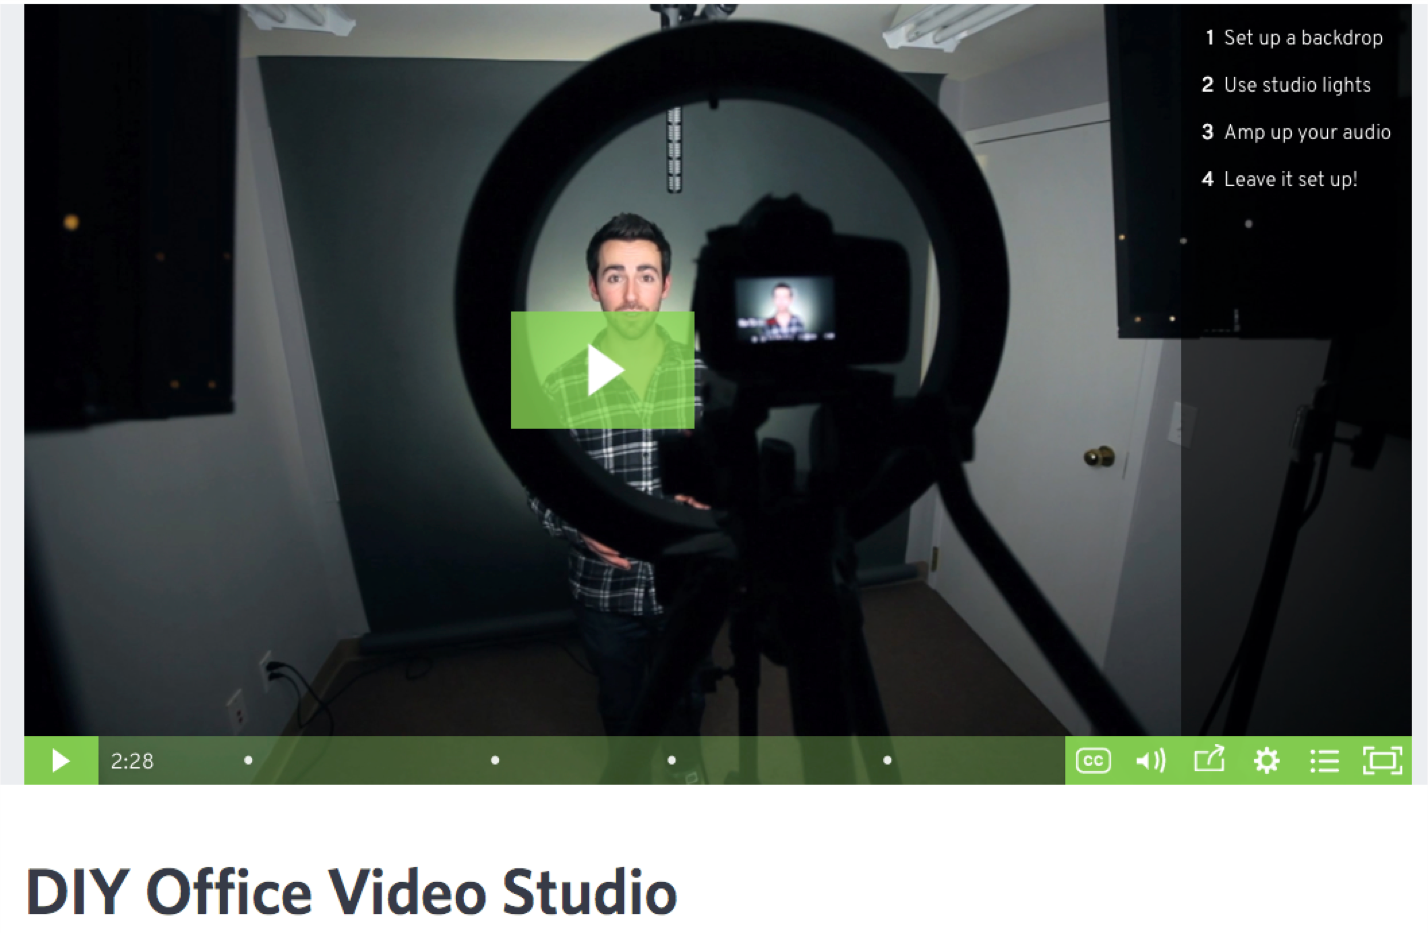 How to build video culture at your company DIY office video studio setup